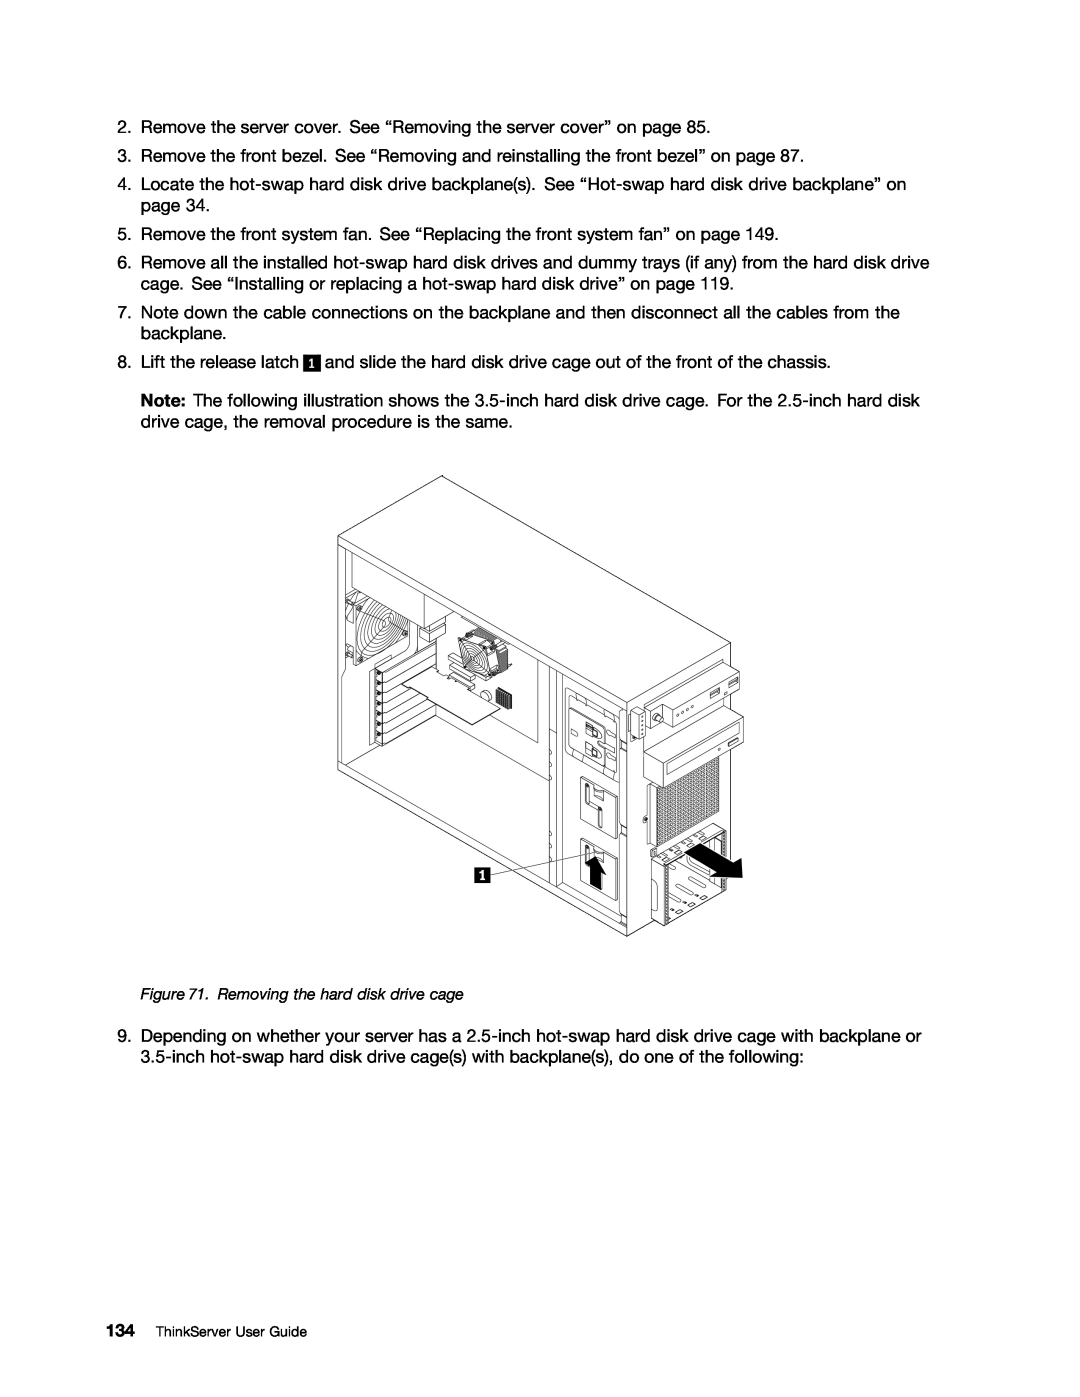 Lenovo 391, 387, 393, 389, 388, 441, 390, 392 manual Removing the hard disk drive cage, ThinkServer User Guide 